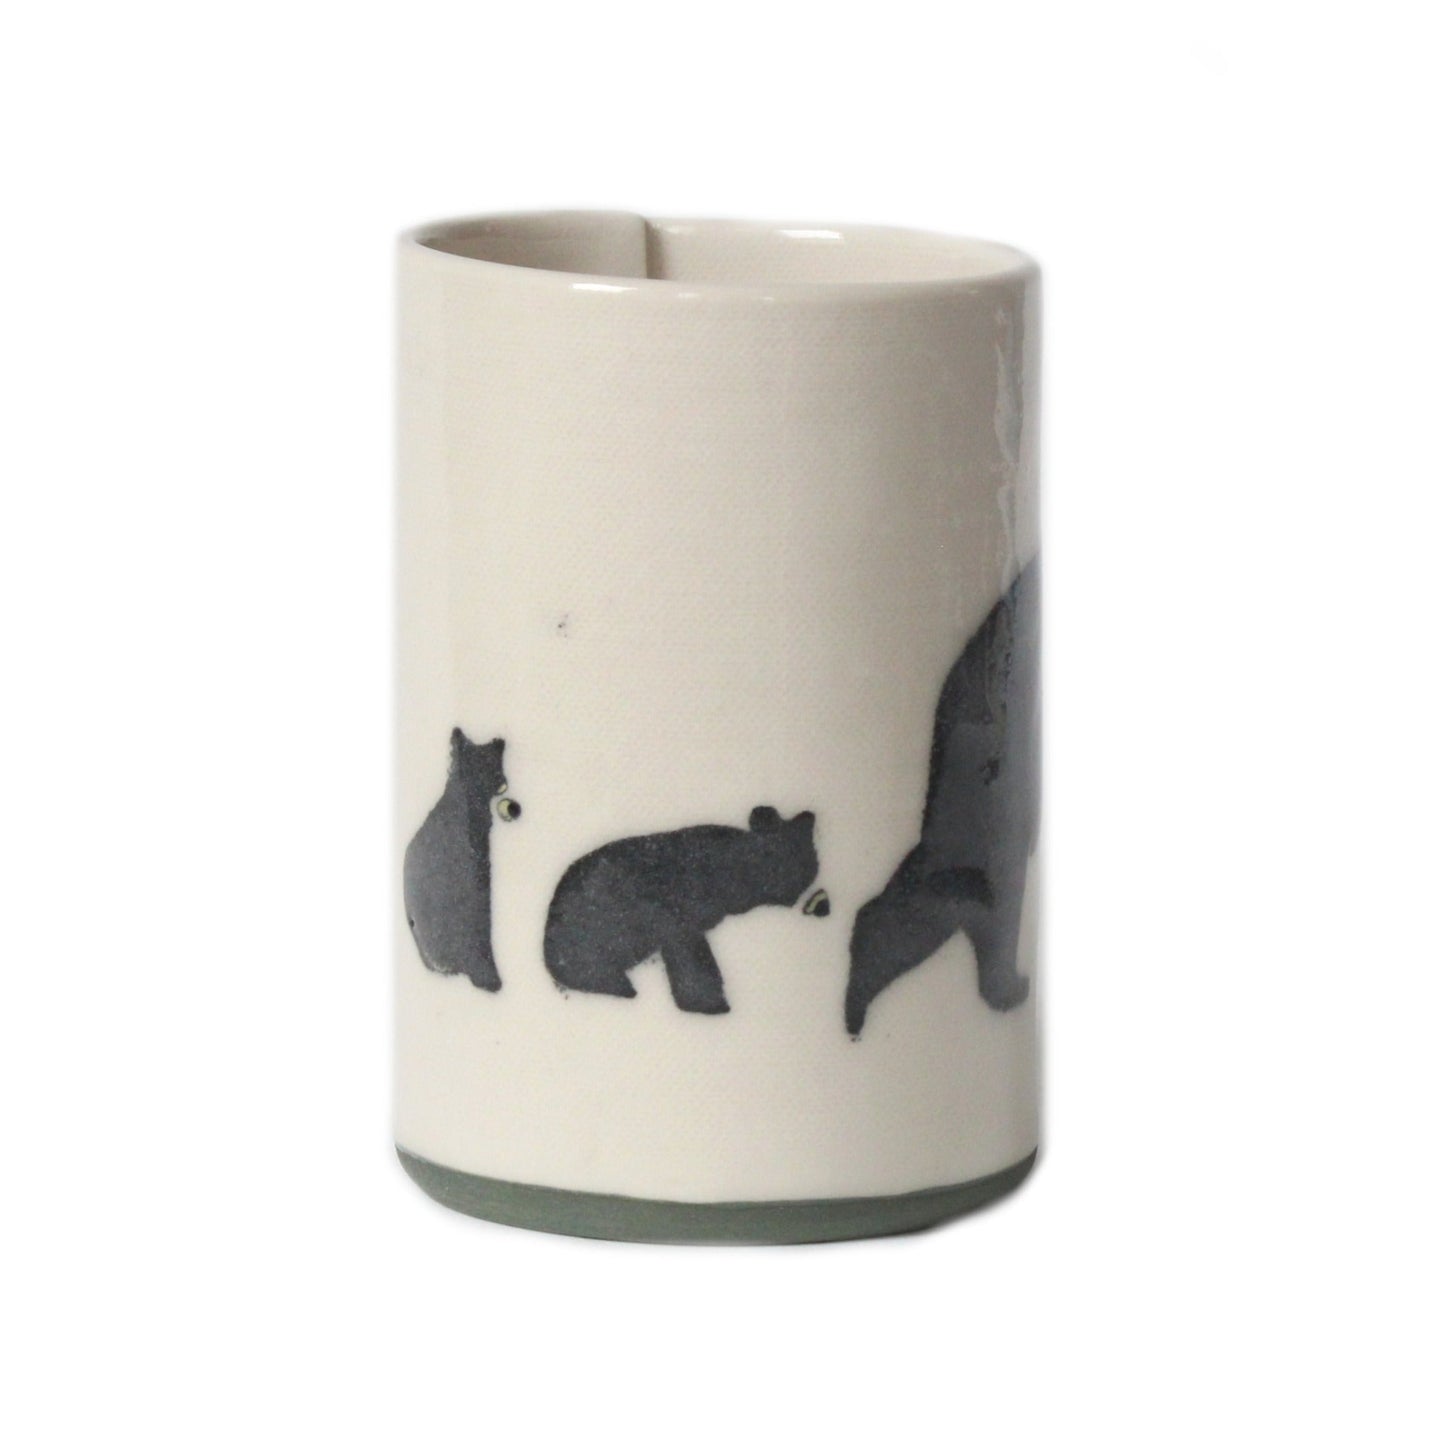 Handmade stoneware clay mug with black bear painting, made in Canada by Susan Robertson Pottery.